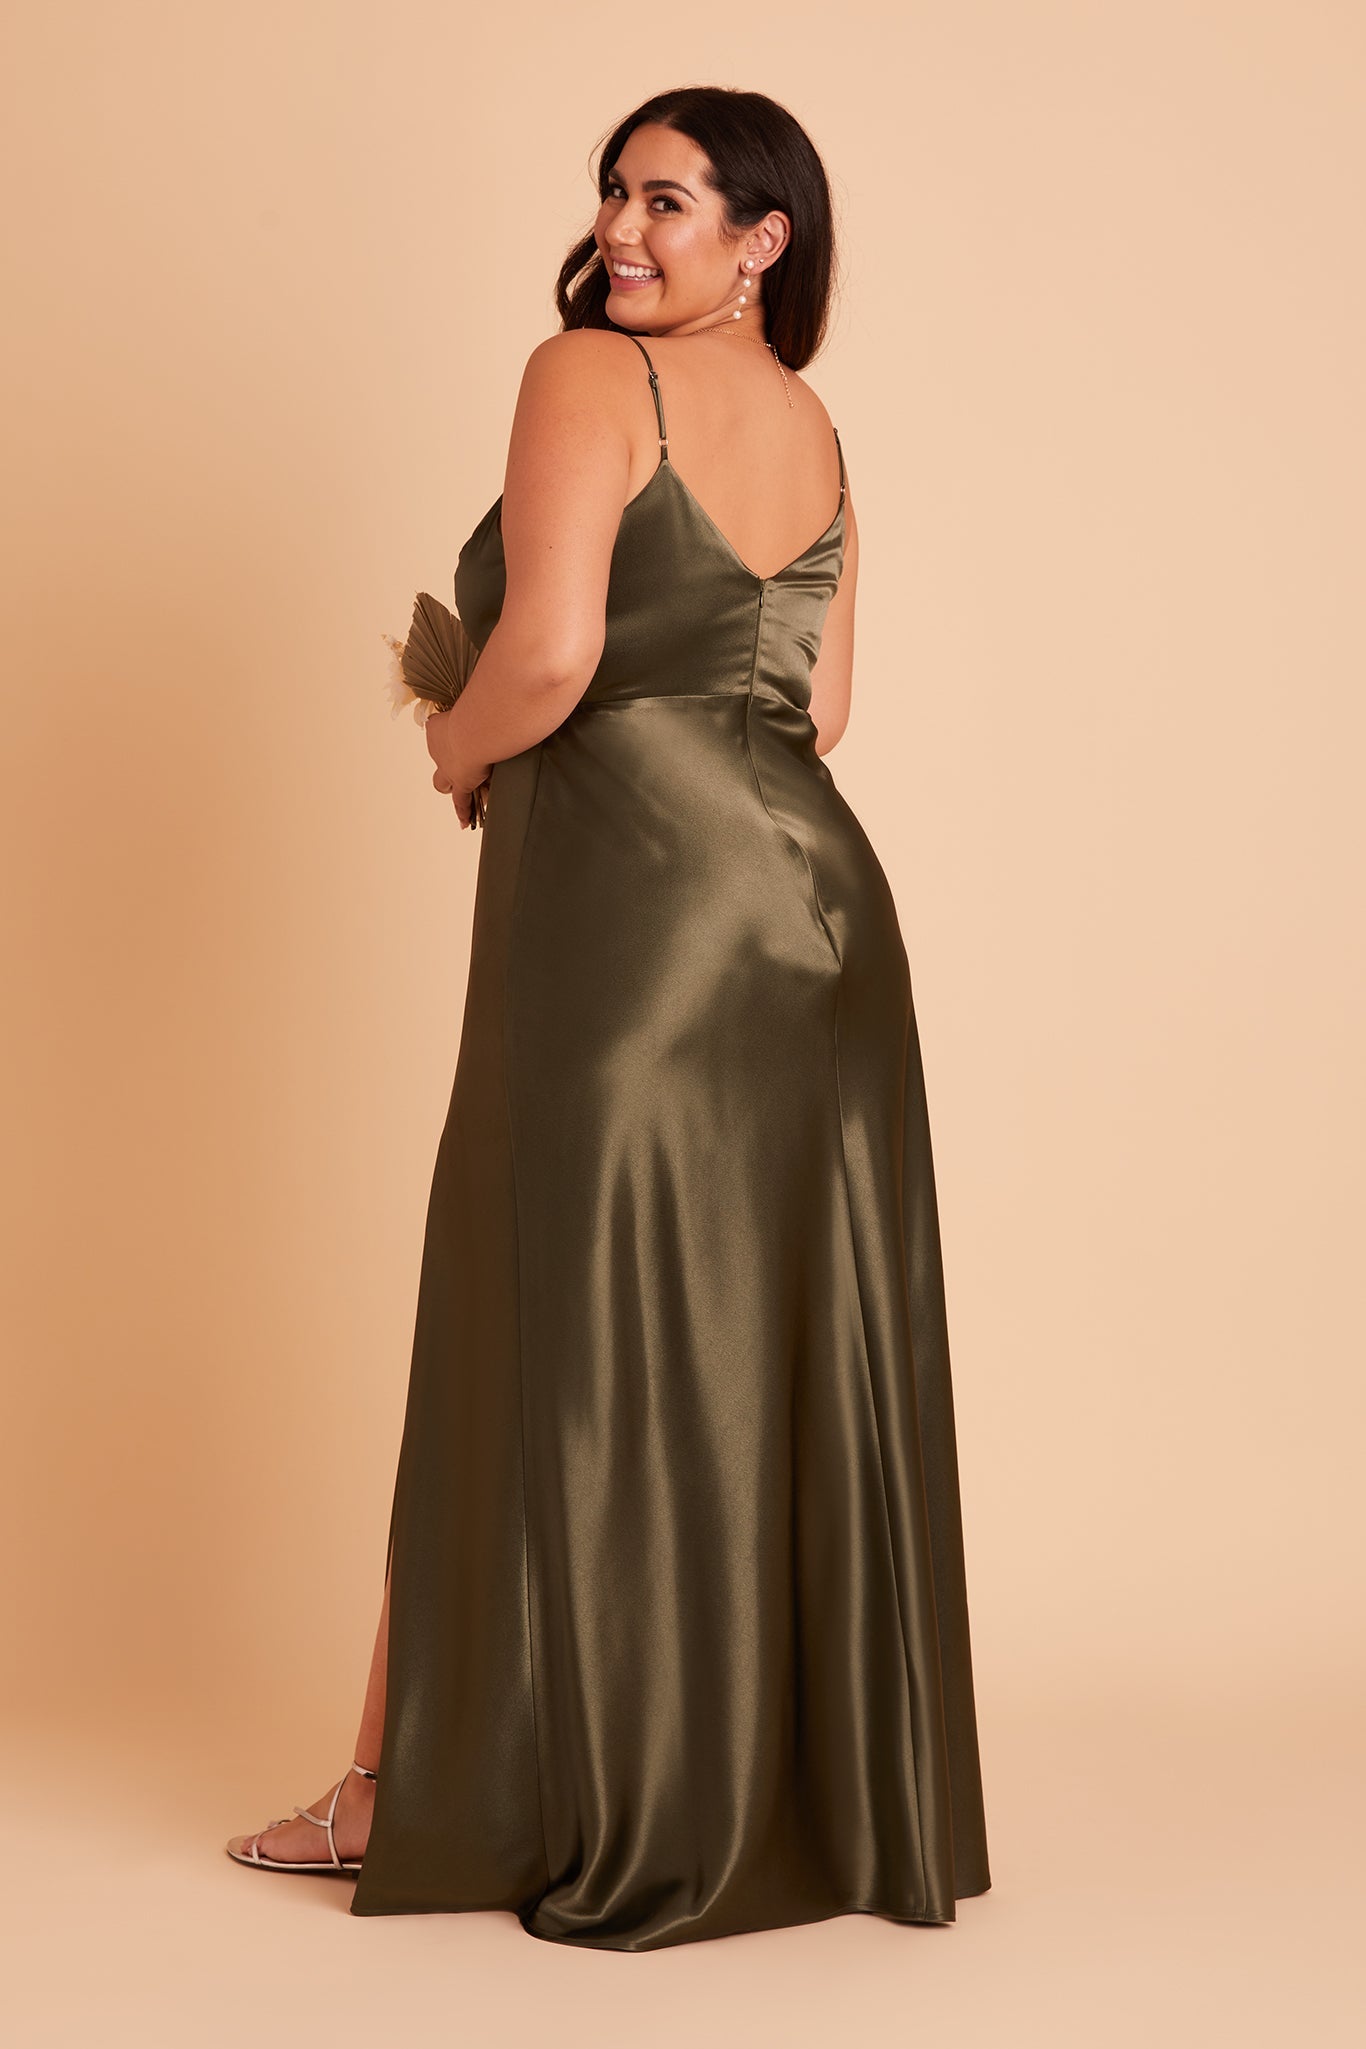 Jay plus size bridesmaid dress with slit in olive satin by Birdy Grey, back view